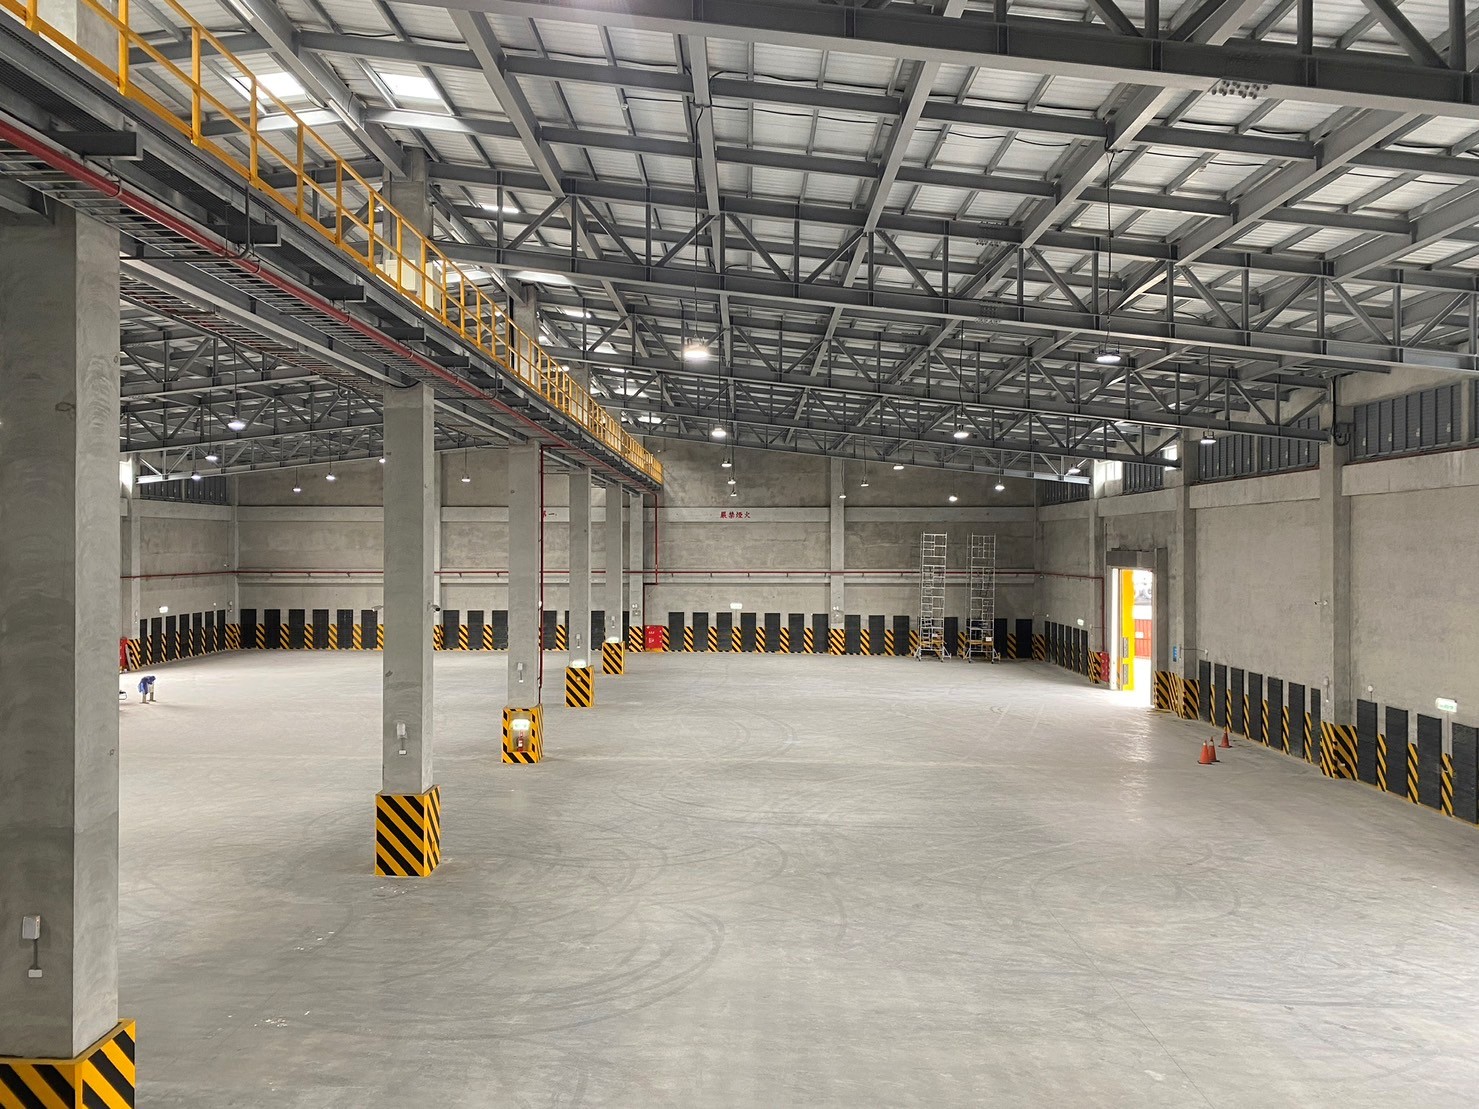 Image 2: Interior of the newly completed Port of Keelung West Warehouse 27